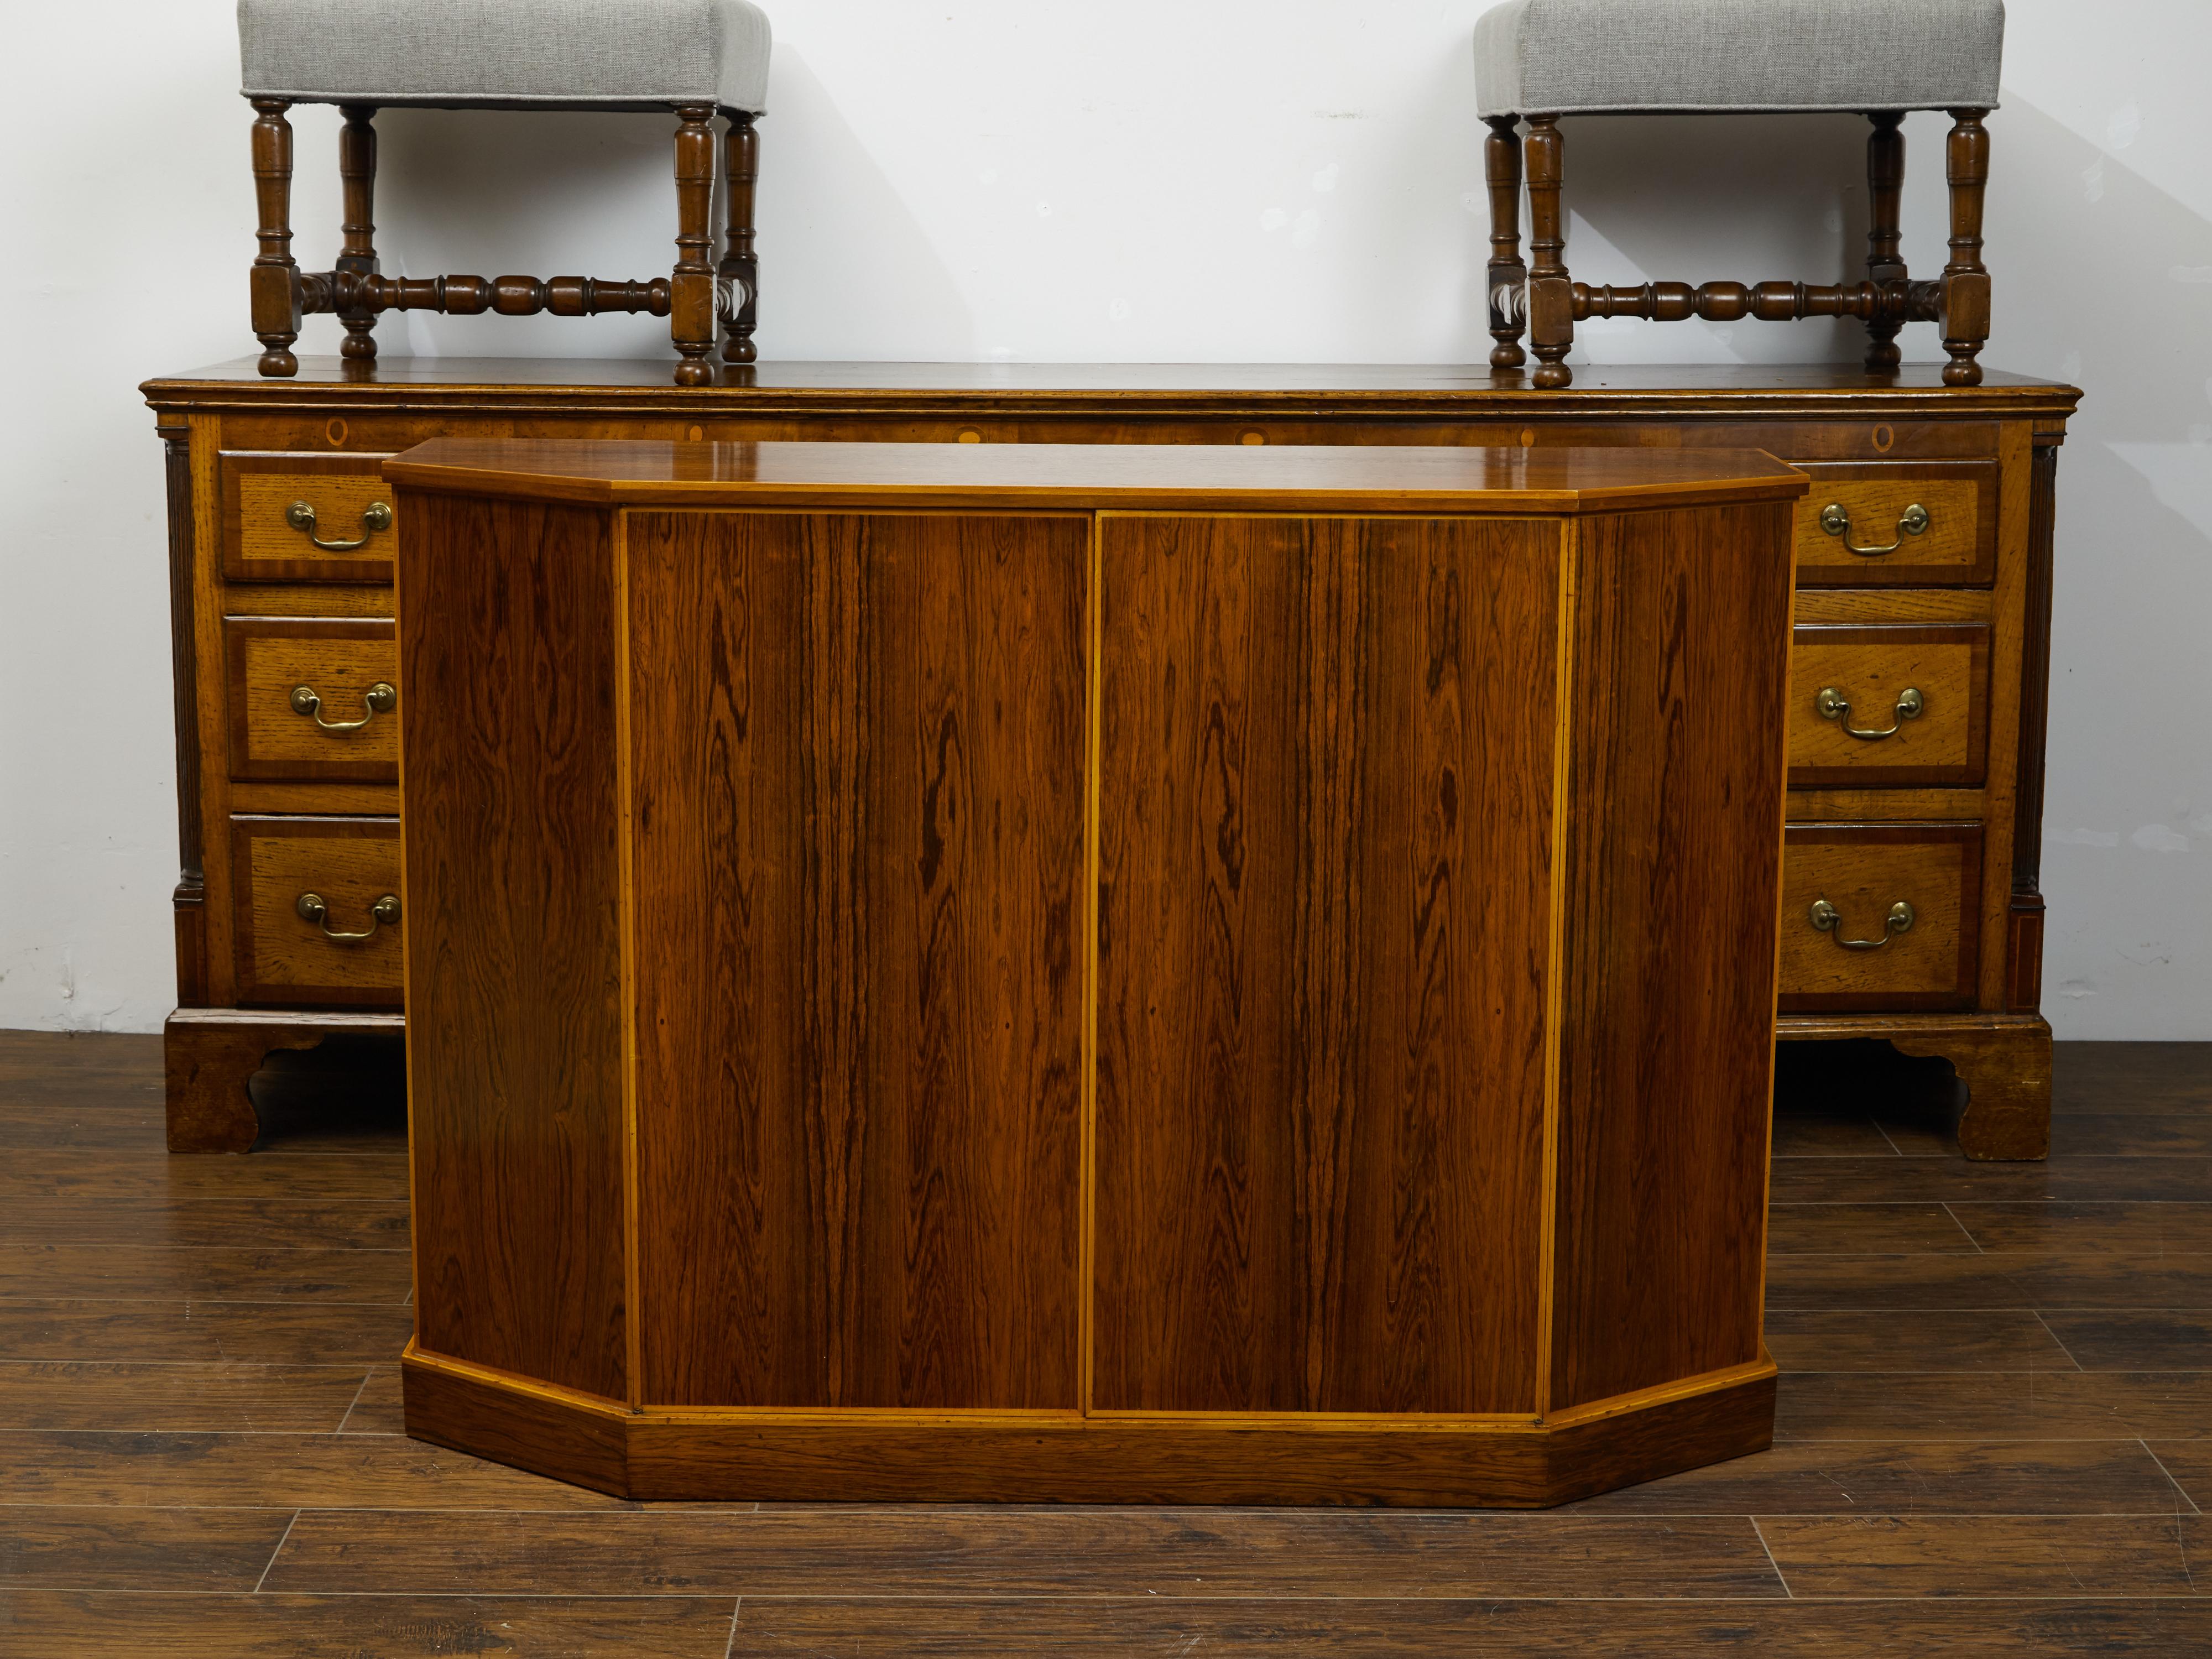 An English vintage rosewood credenza from the mid 20th century, with canted panels. Created in England during the midcentury period, this rosewood credenza features a polygonal top sitting above two doors flanked with canted sides. These doors open